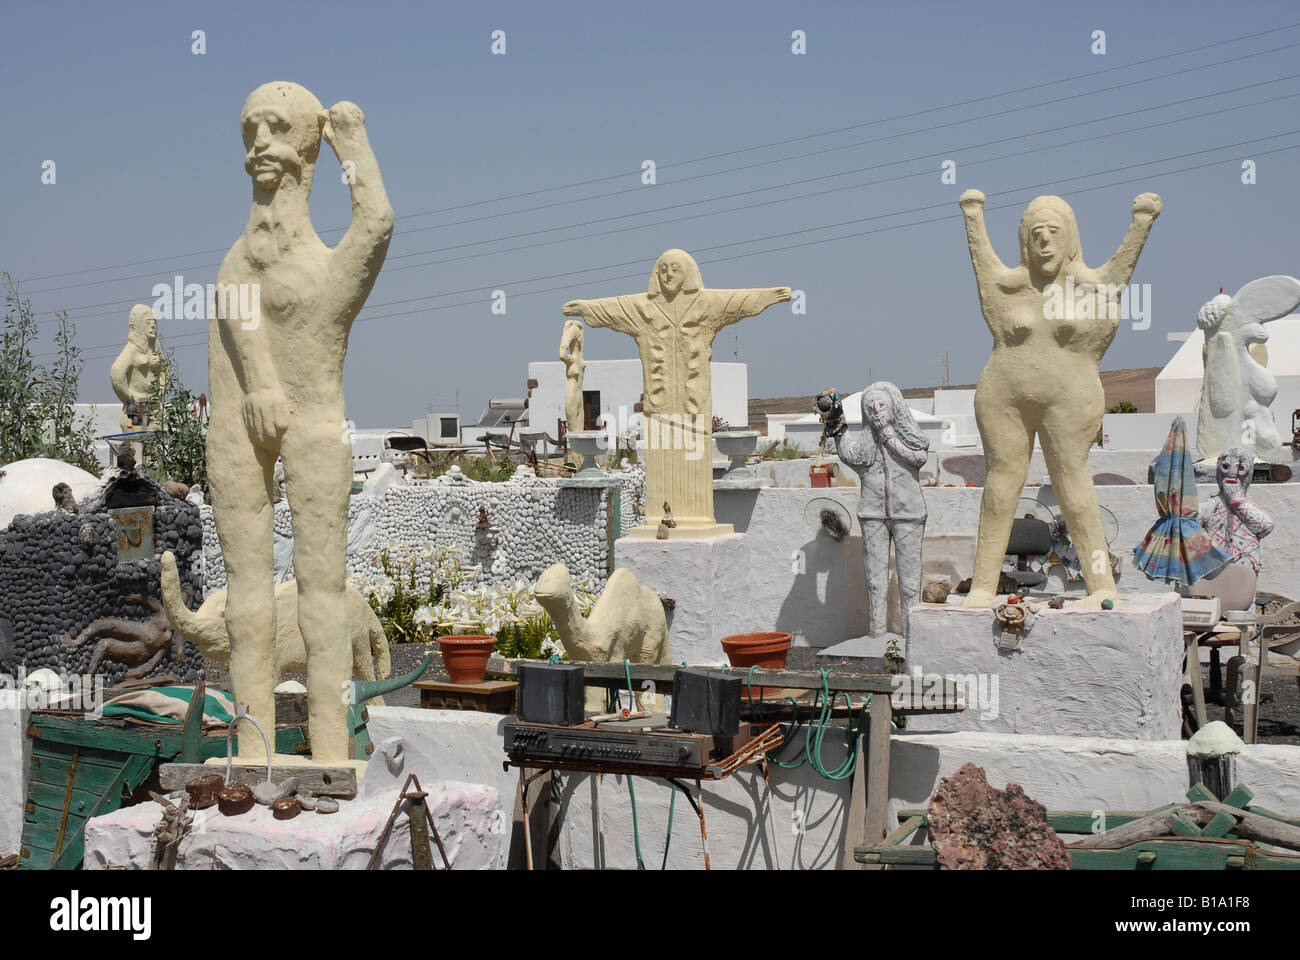 A surreal collection of found art/objects and sculptures in the historic town of Teguise in Lanzarote the Canary Islands. Stock Photo